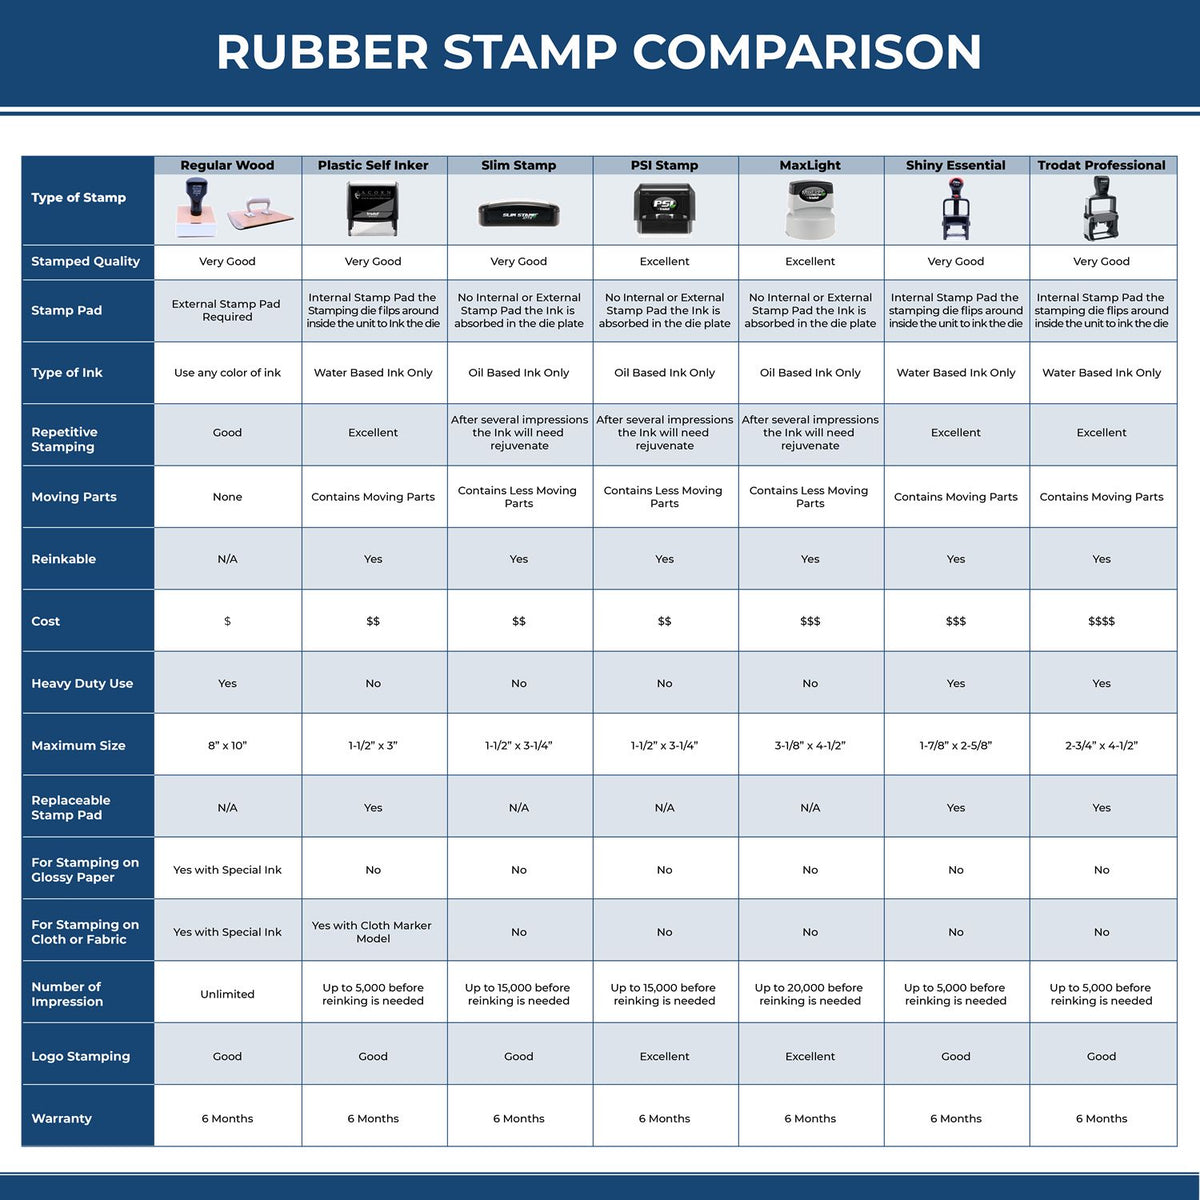 A comparison chart for the different types of mount models available for the Premium MaxLight Pre-Inked Louisiana Landscape Architectural Stamp.